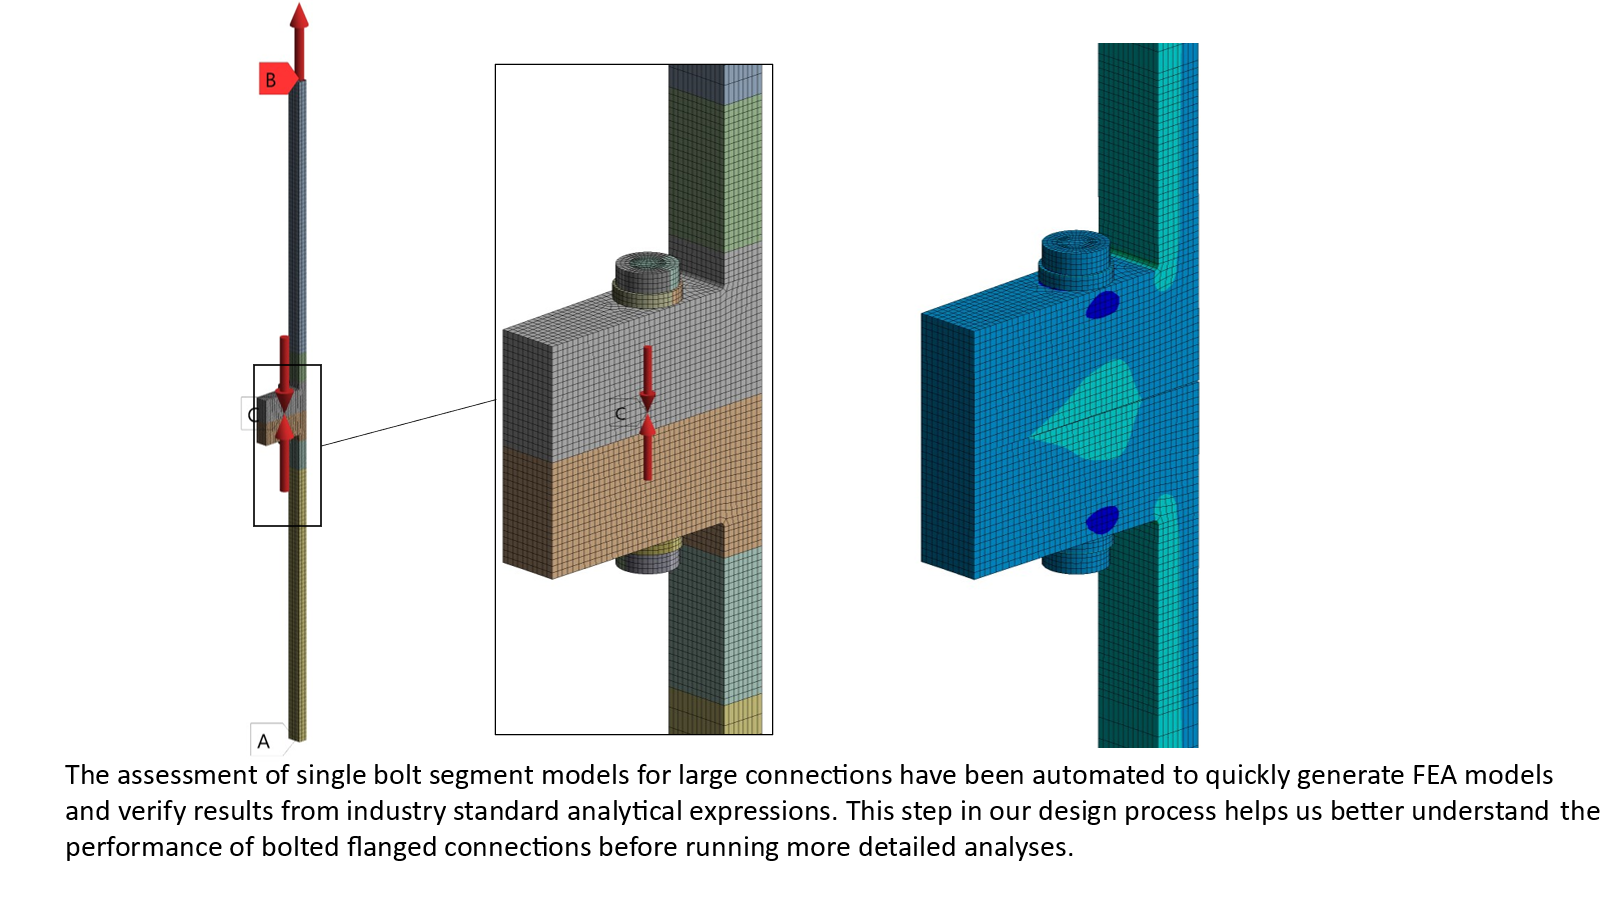 The assessment of single bolt segment models for large connections